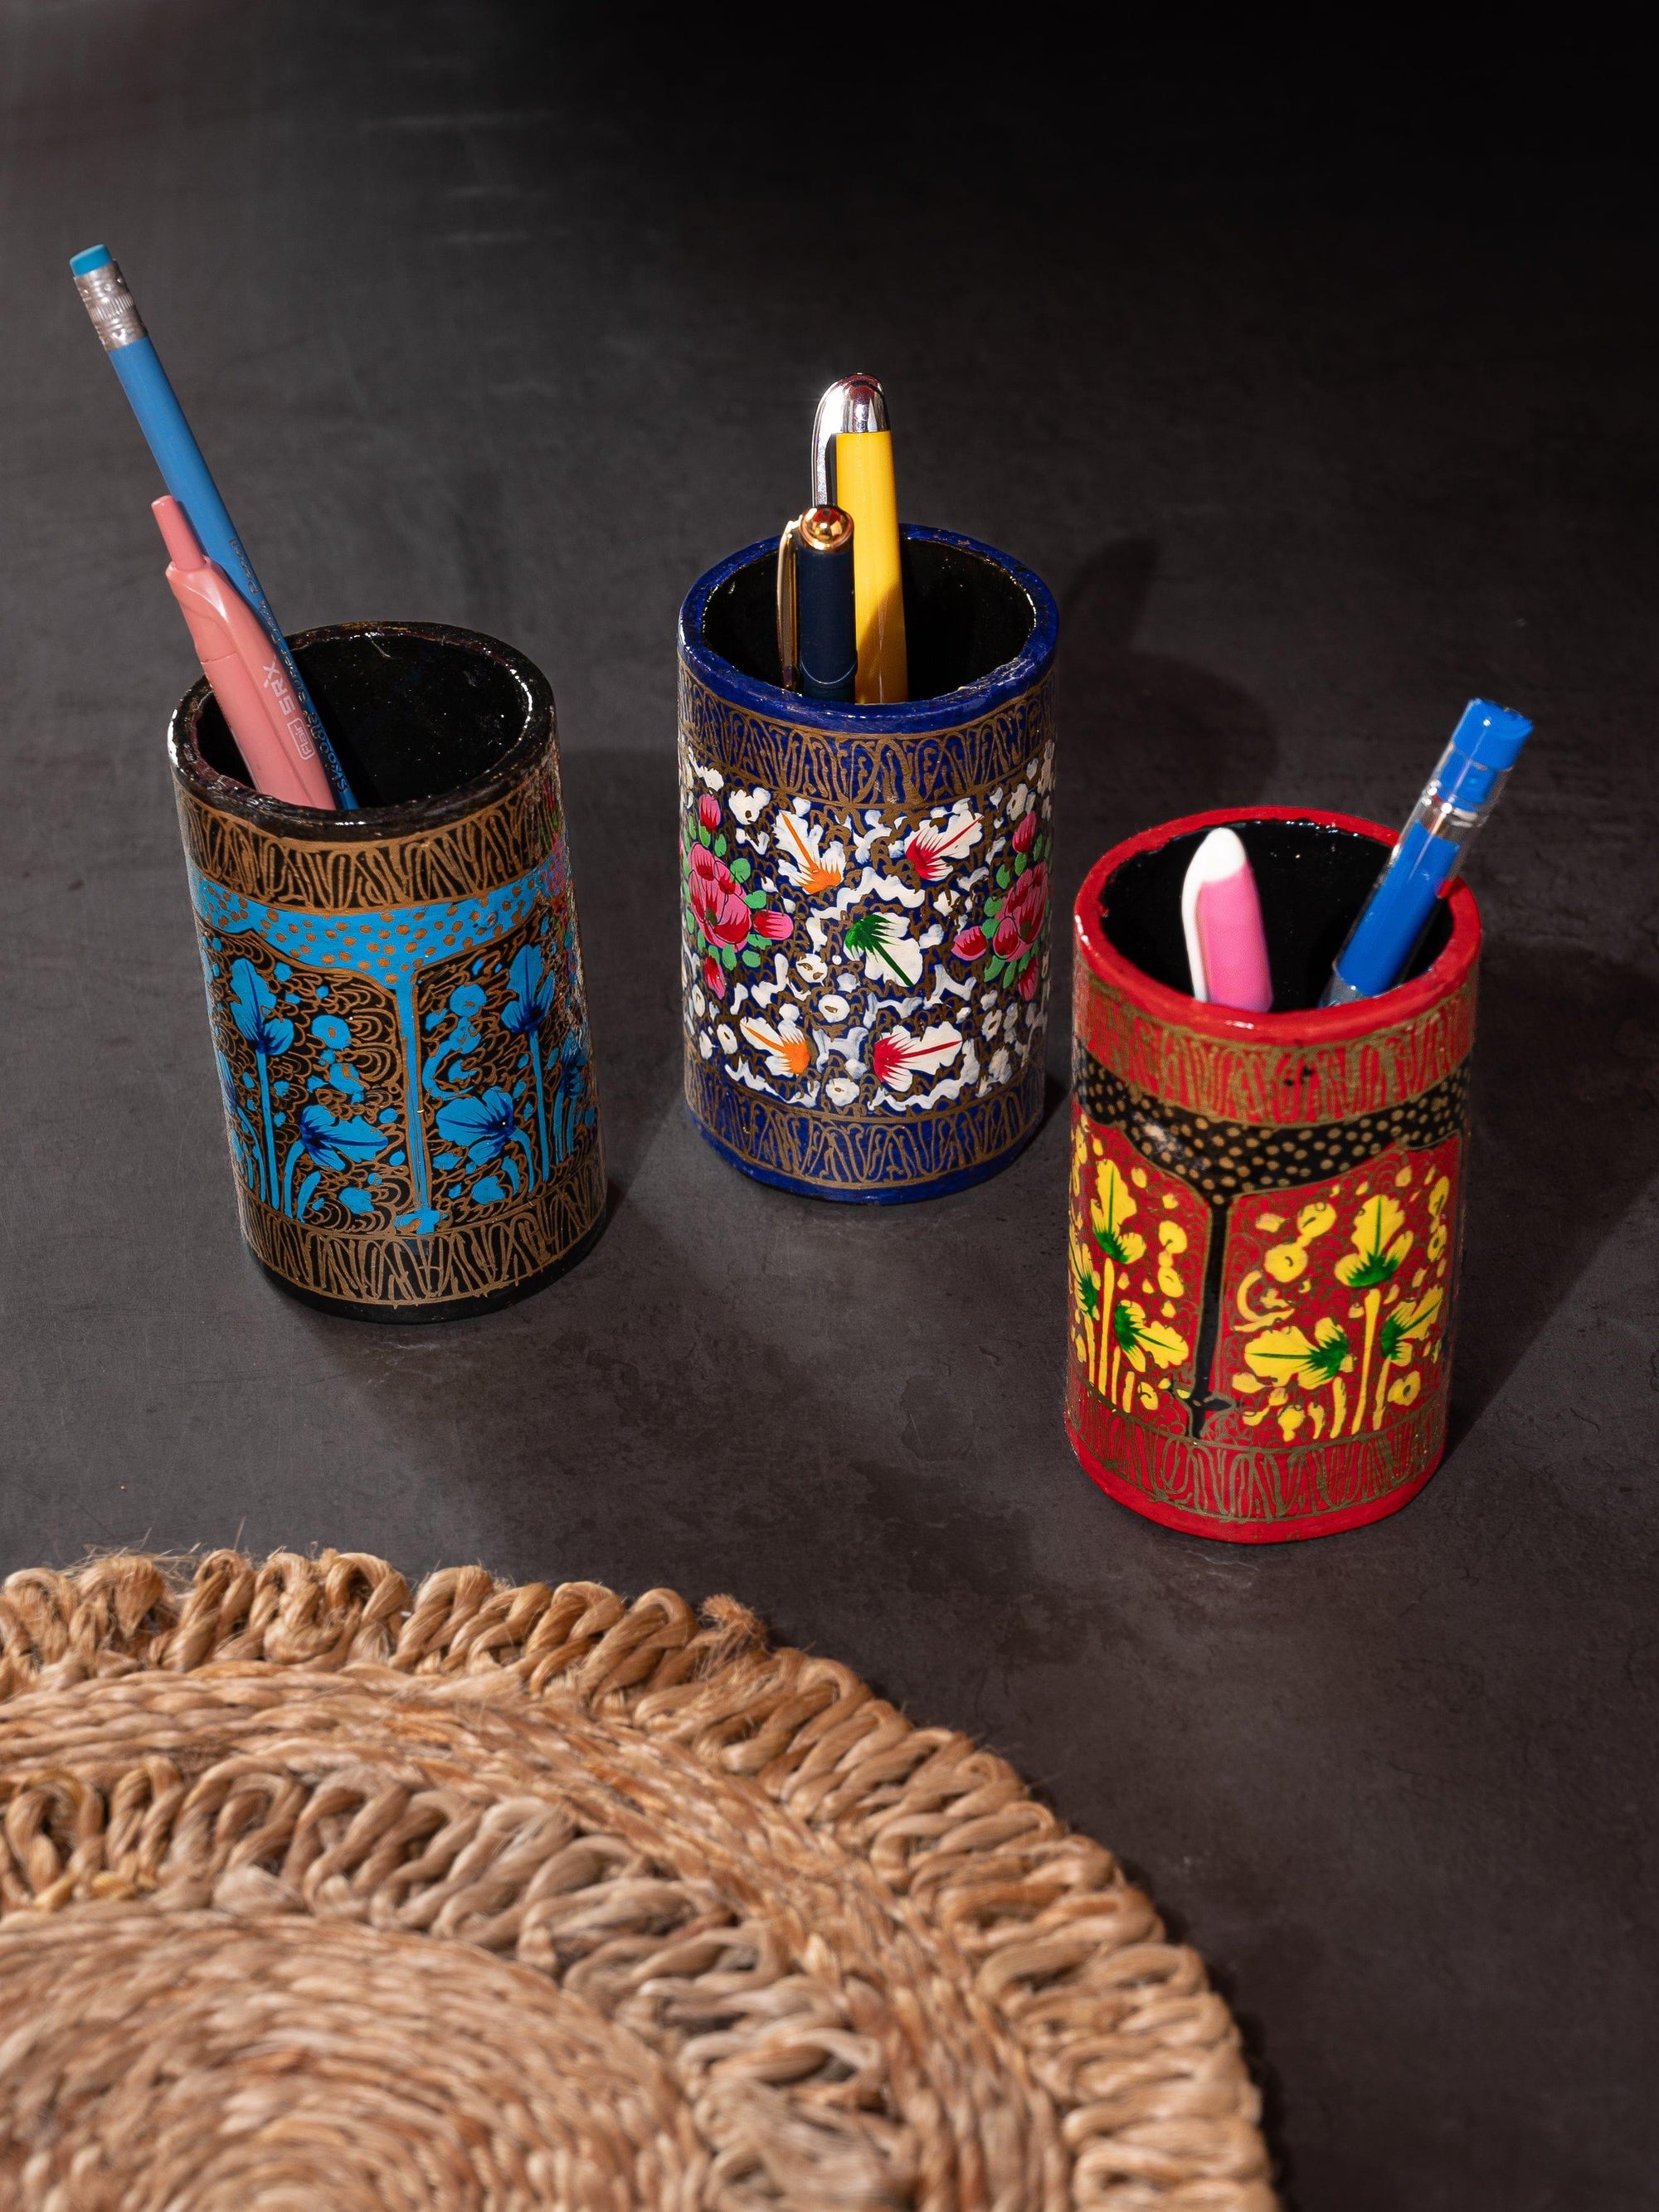 Kashmiri Paper Mache Pen / Pencil Holder - Available in Assorted Design and Colors - The Heritage Artifacts